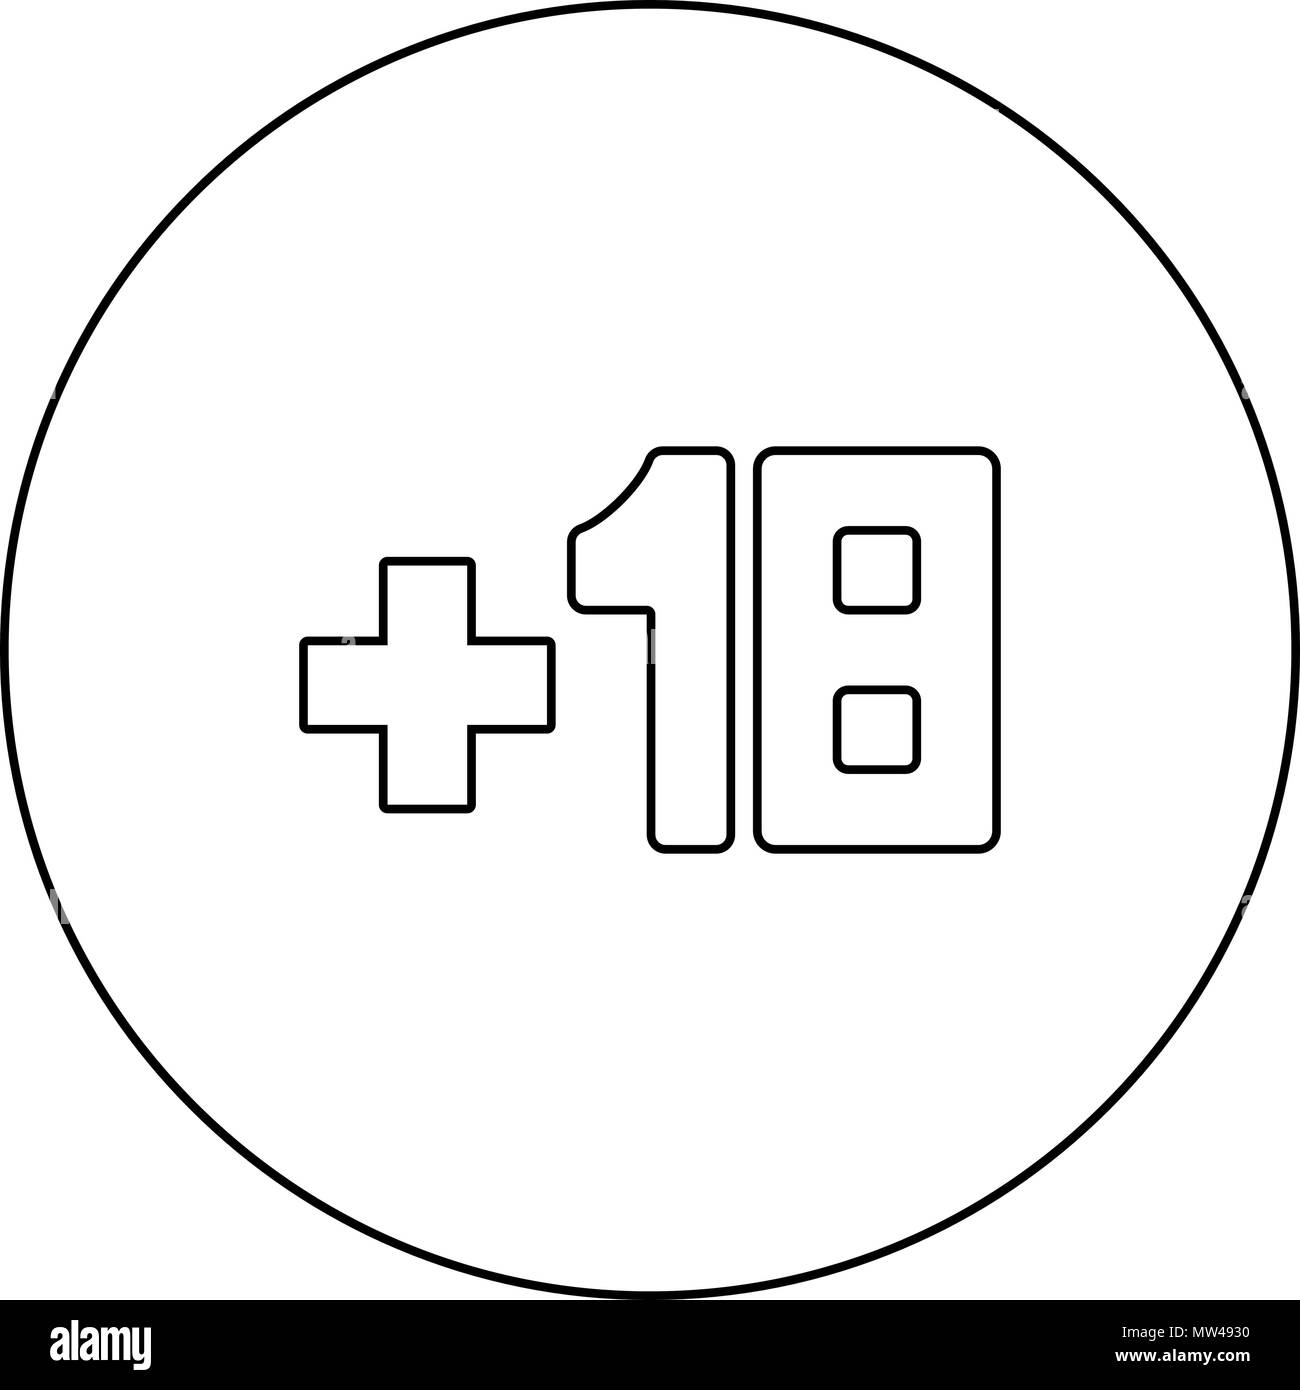 Plus eighteen +18 black icon in circle outline vector I isolated Stock Vector